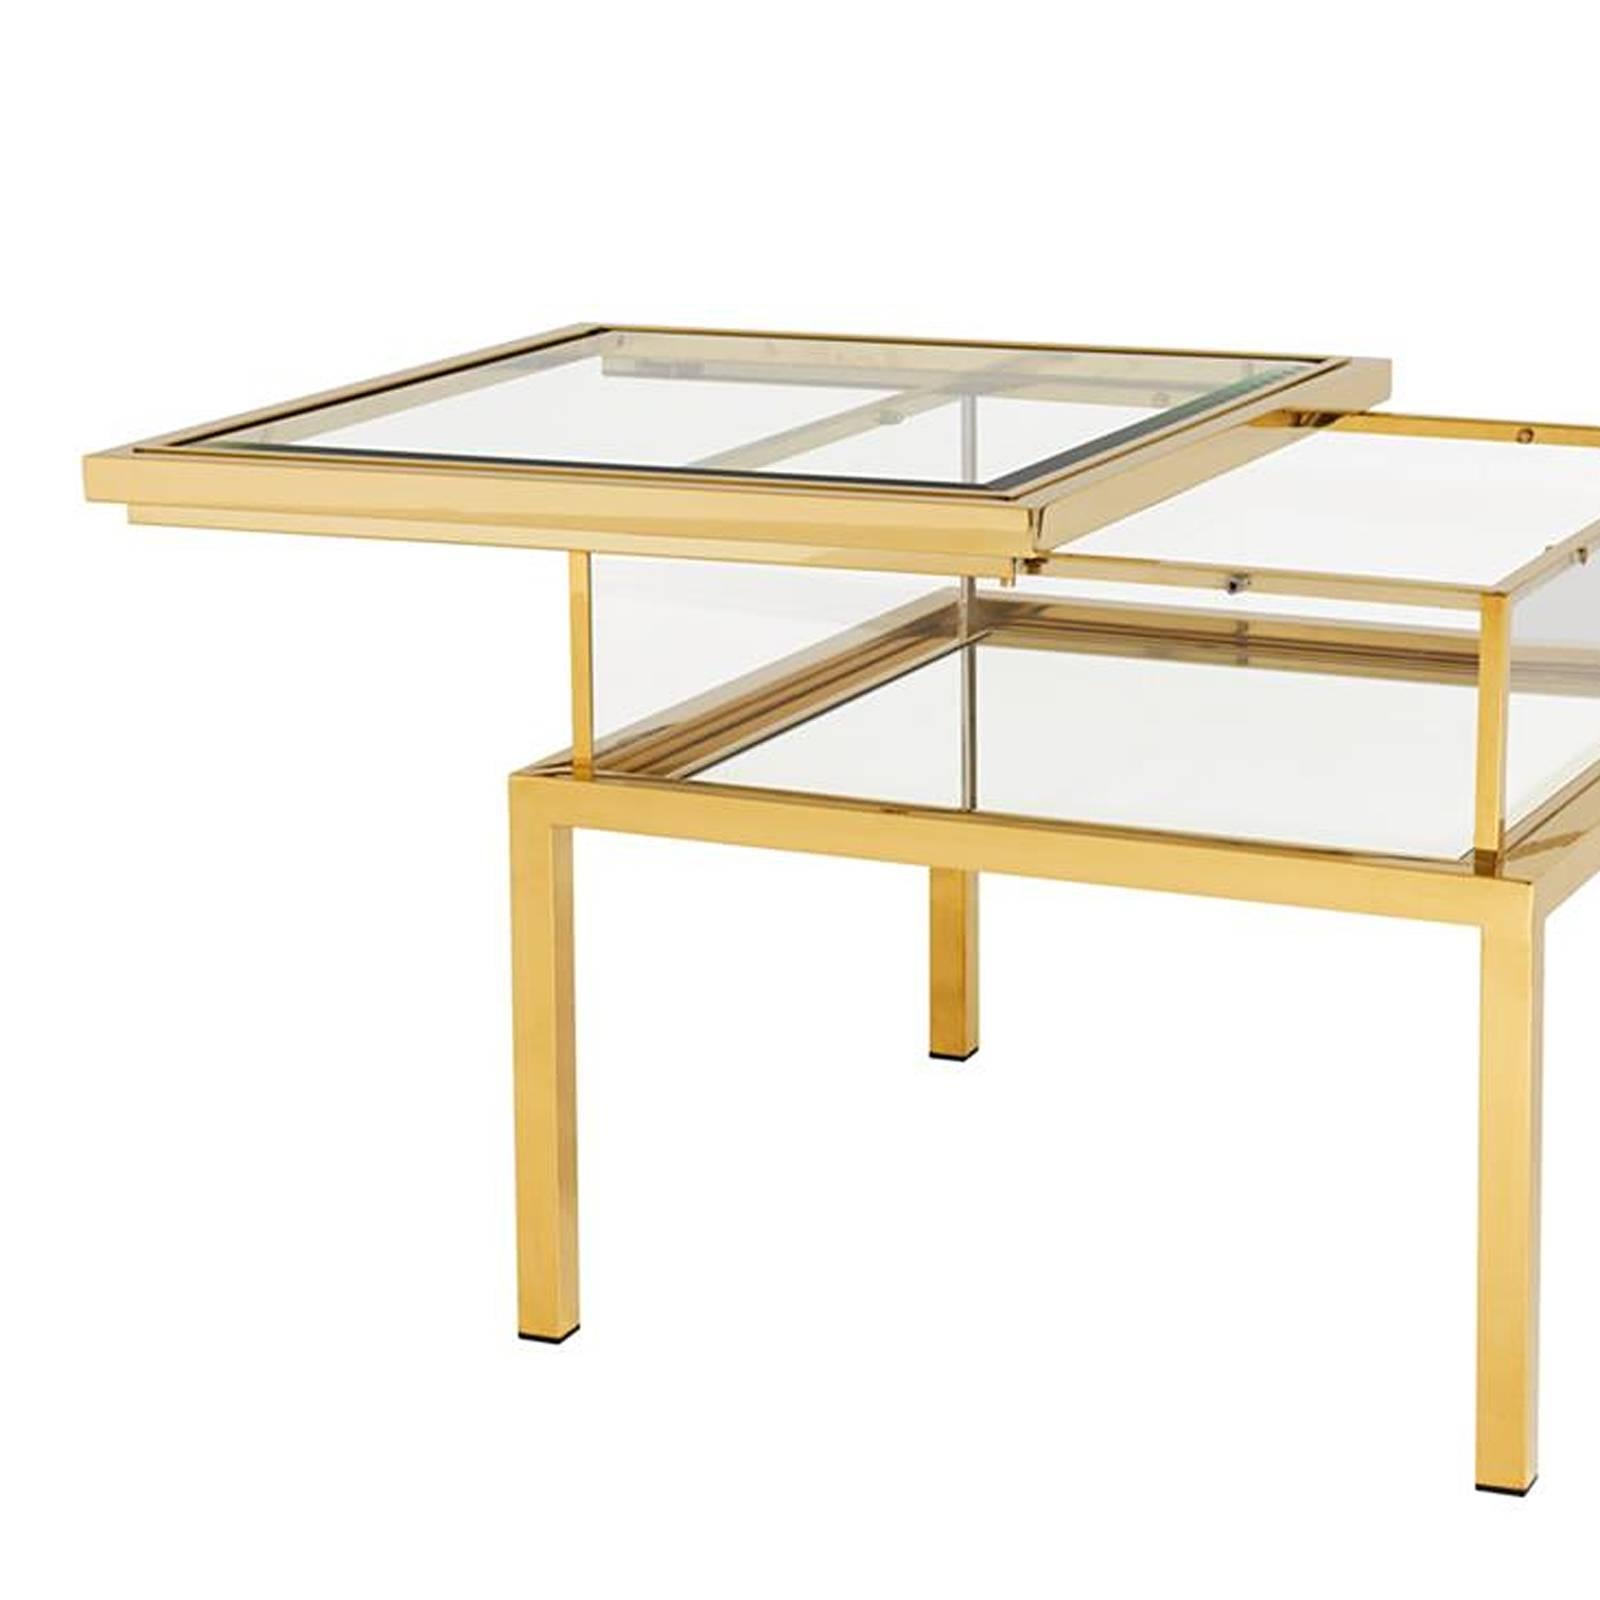 Side table slide in gold finish, clear glass and mirror
Glass sliding top. Available in polished stainless steel
or in bronze finish. Also available in coffe table, square
coffee table or in console table slide.
